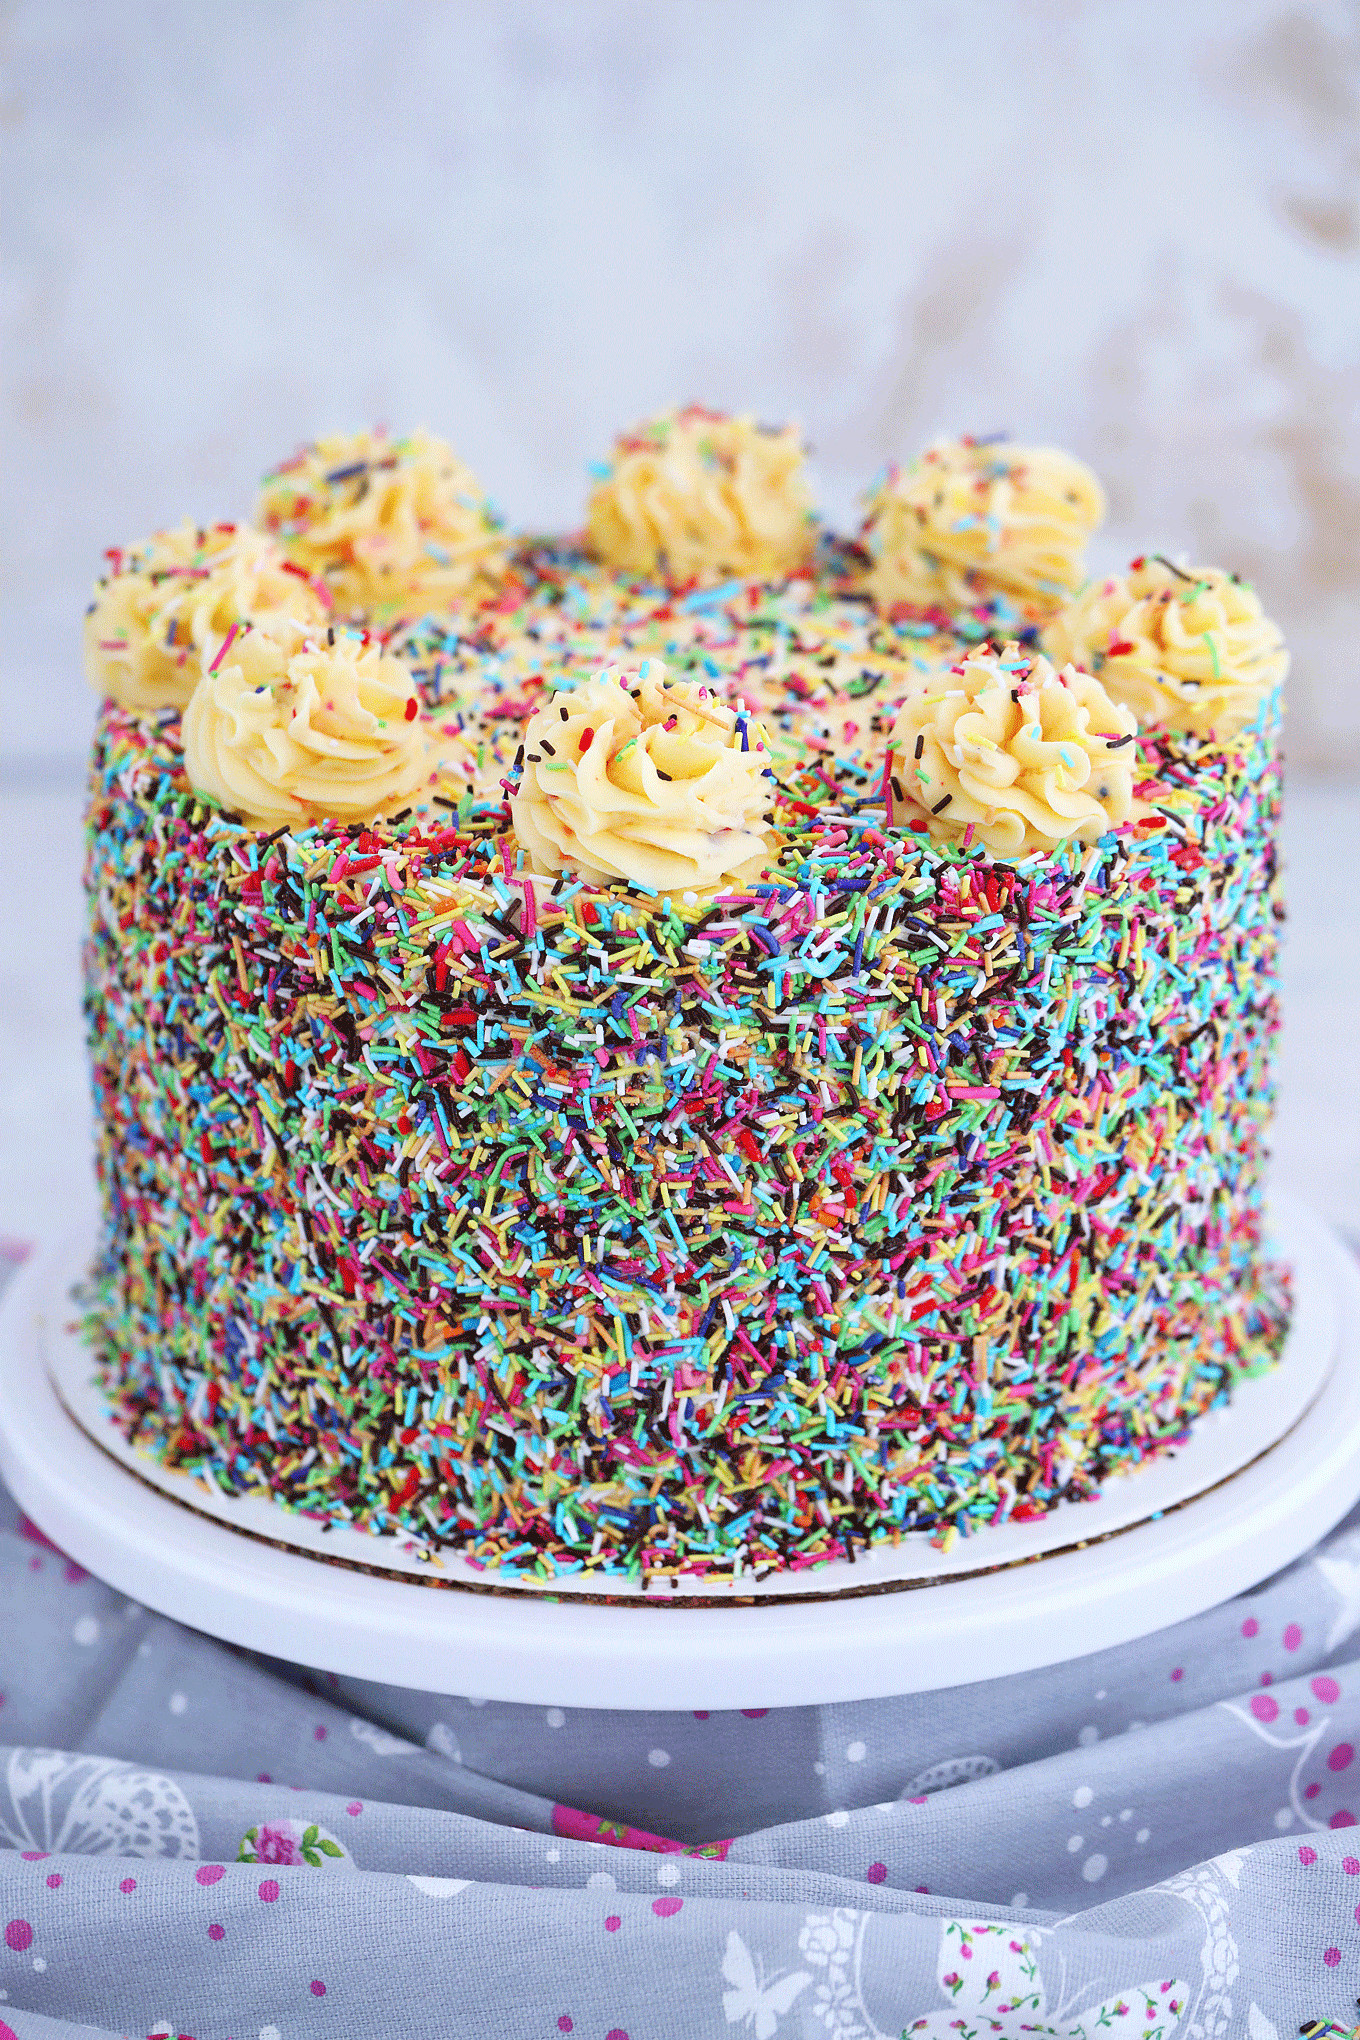 Pictures Of Birthday Cakes
 Birthday Cake Recipe [Video] Sweet and Savory Meals